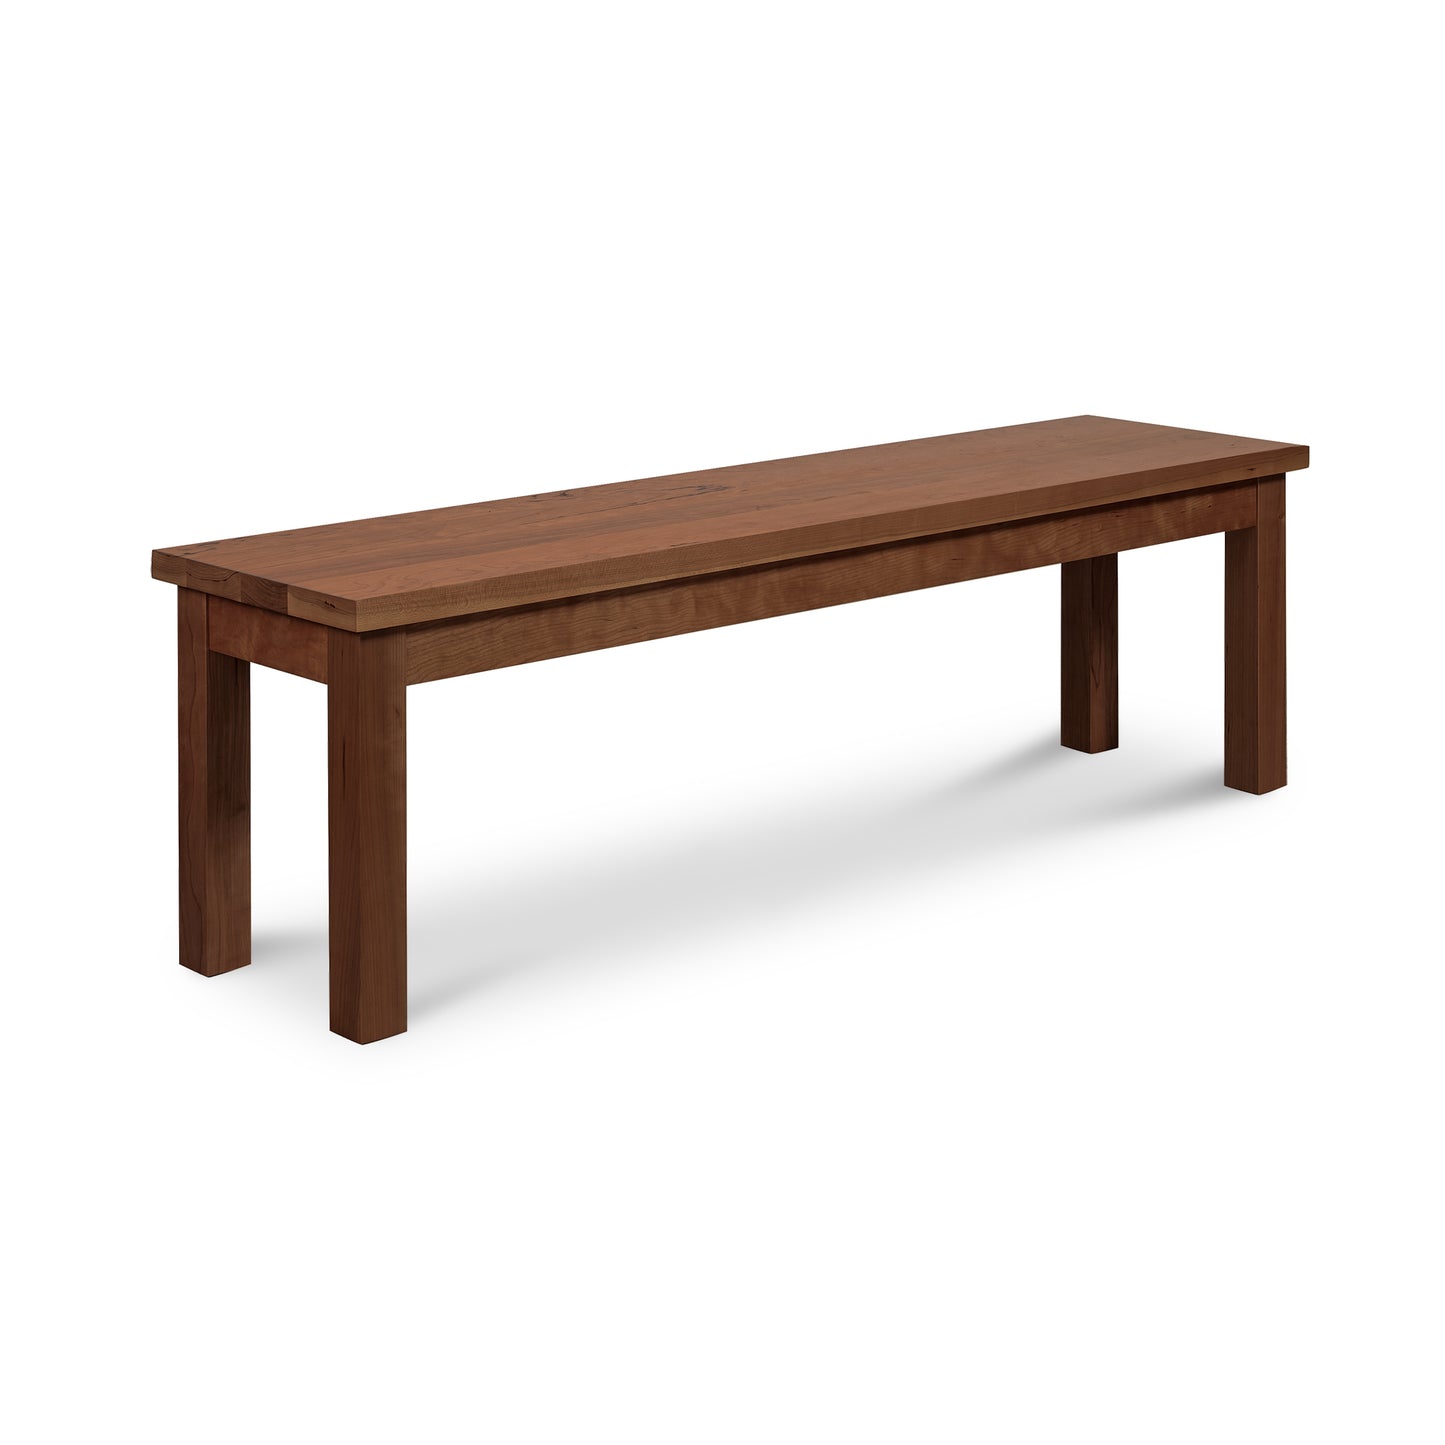 A Lyndon Furniture American Mission Bench made of solid wood, perfect for dining room décor, set against a white background.